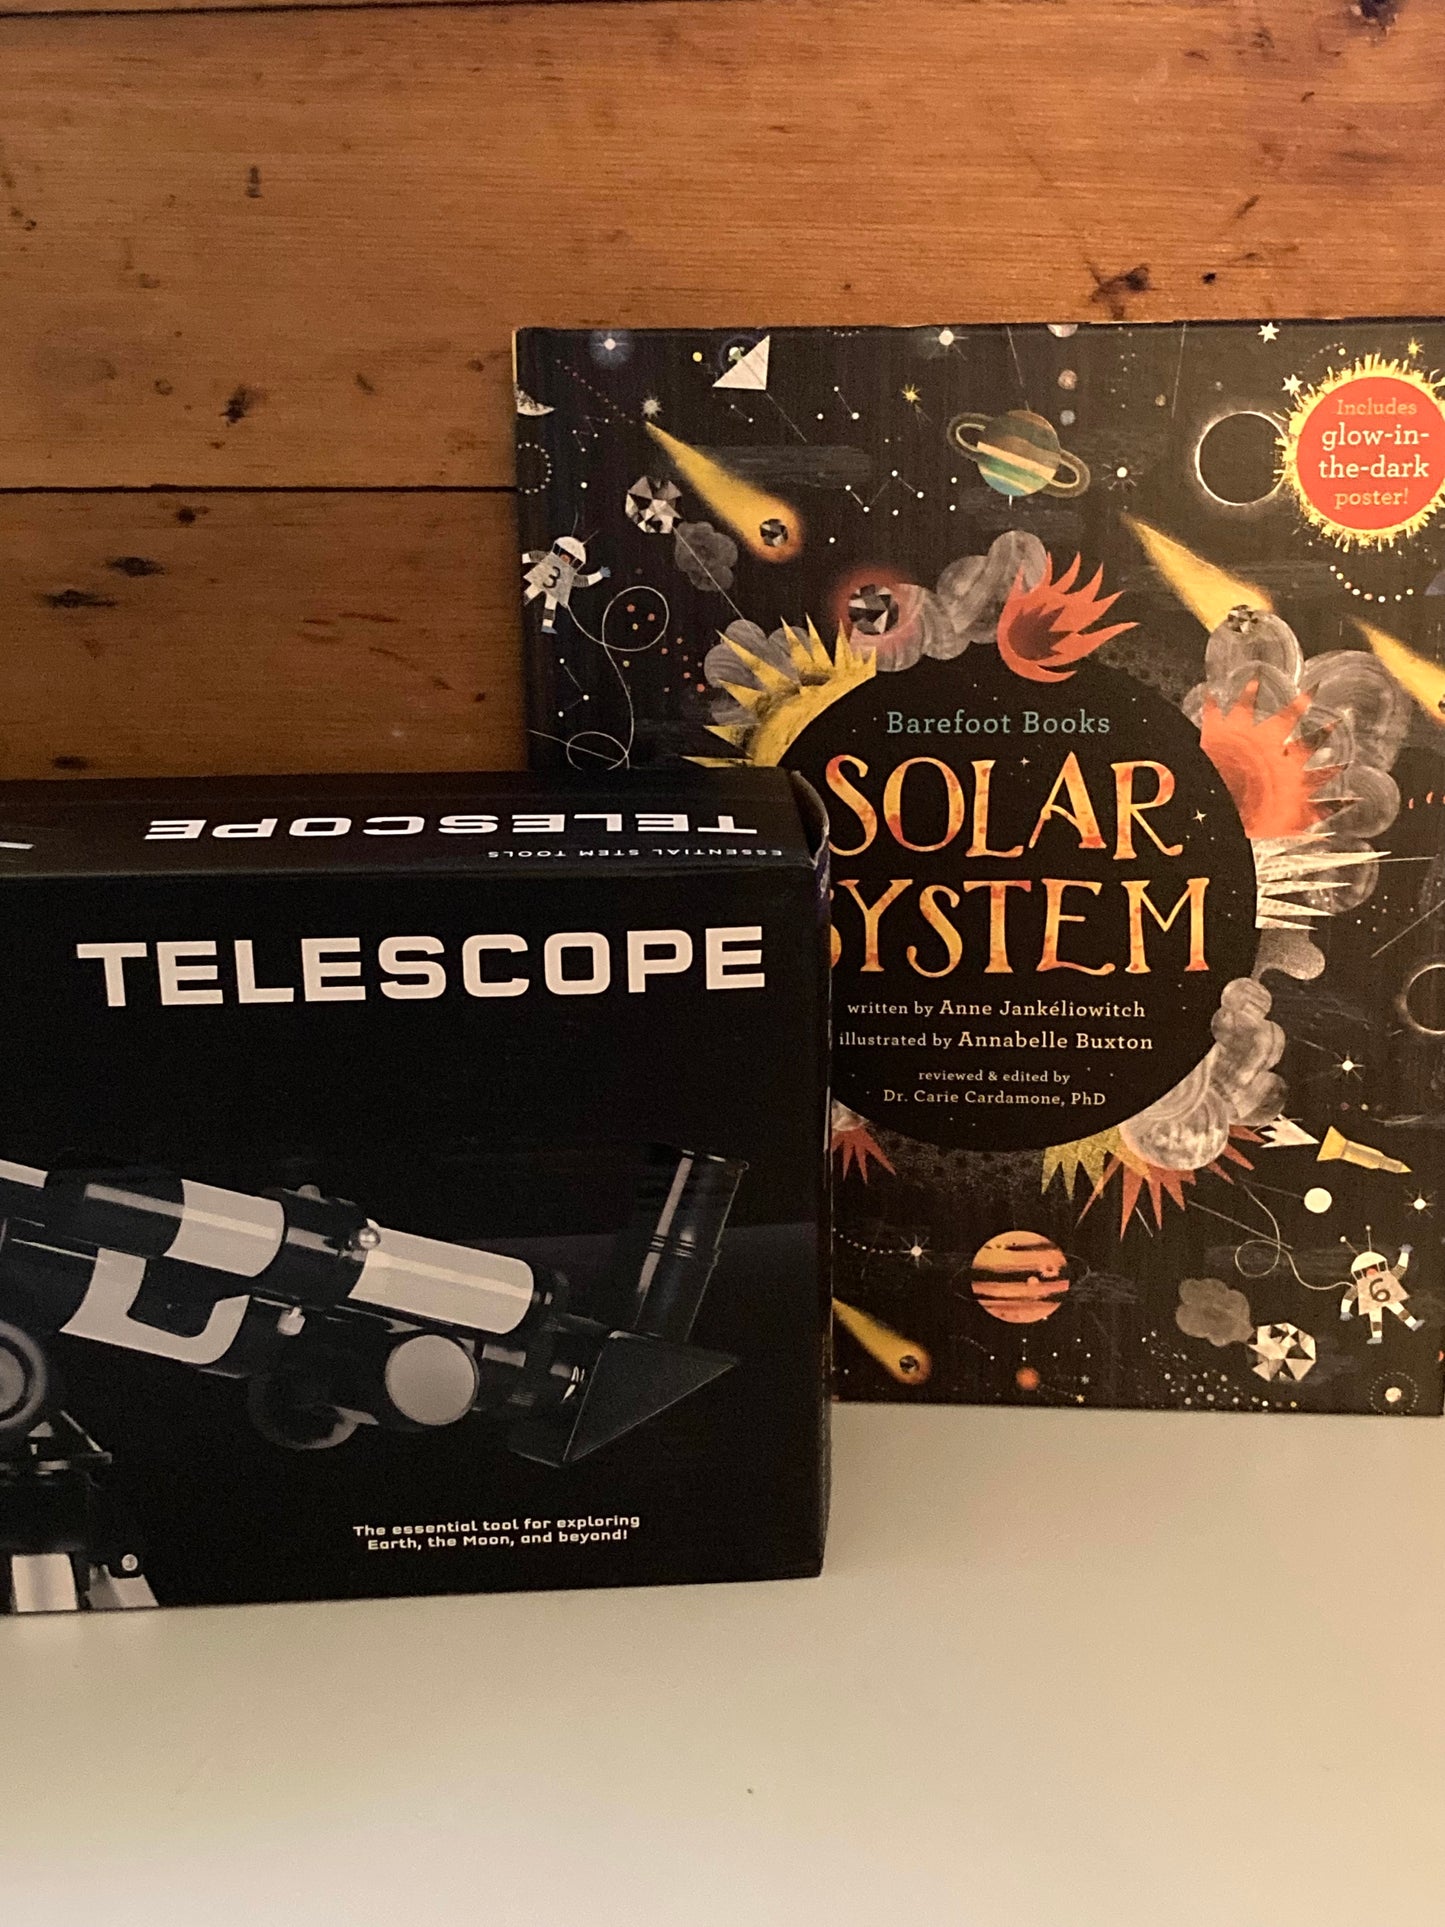 Educational Real Working TELESCOPE, with Tripod stand!